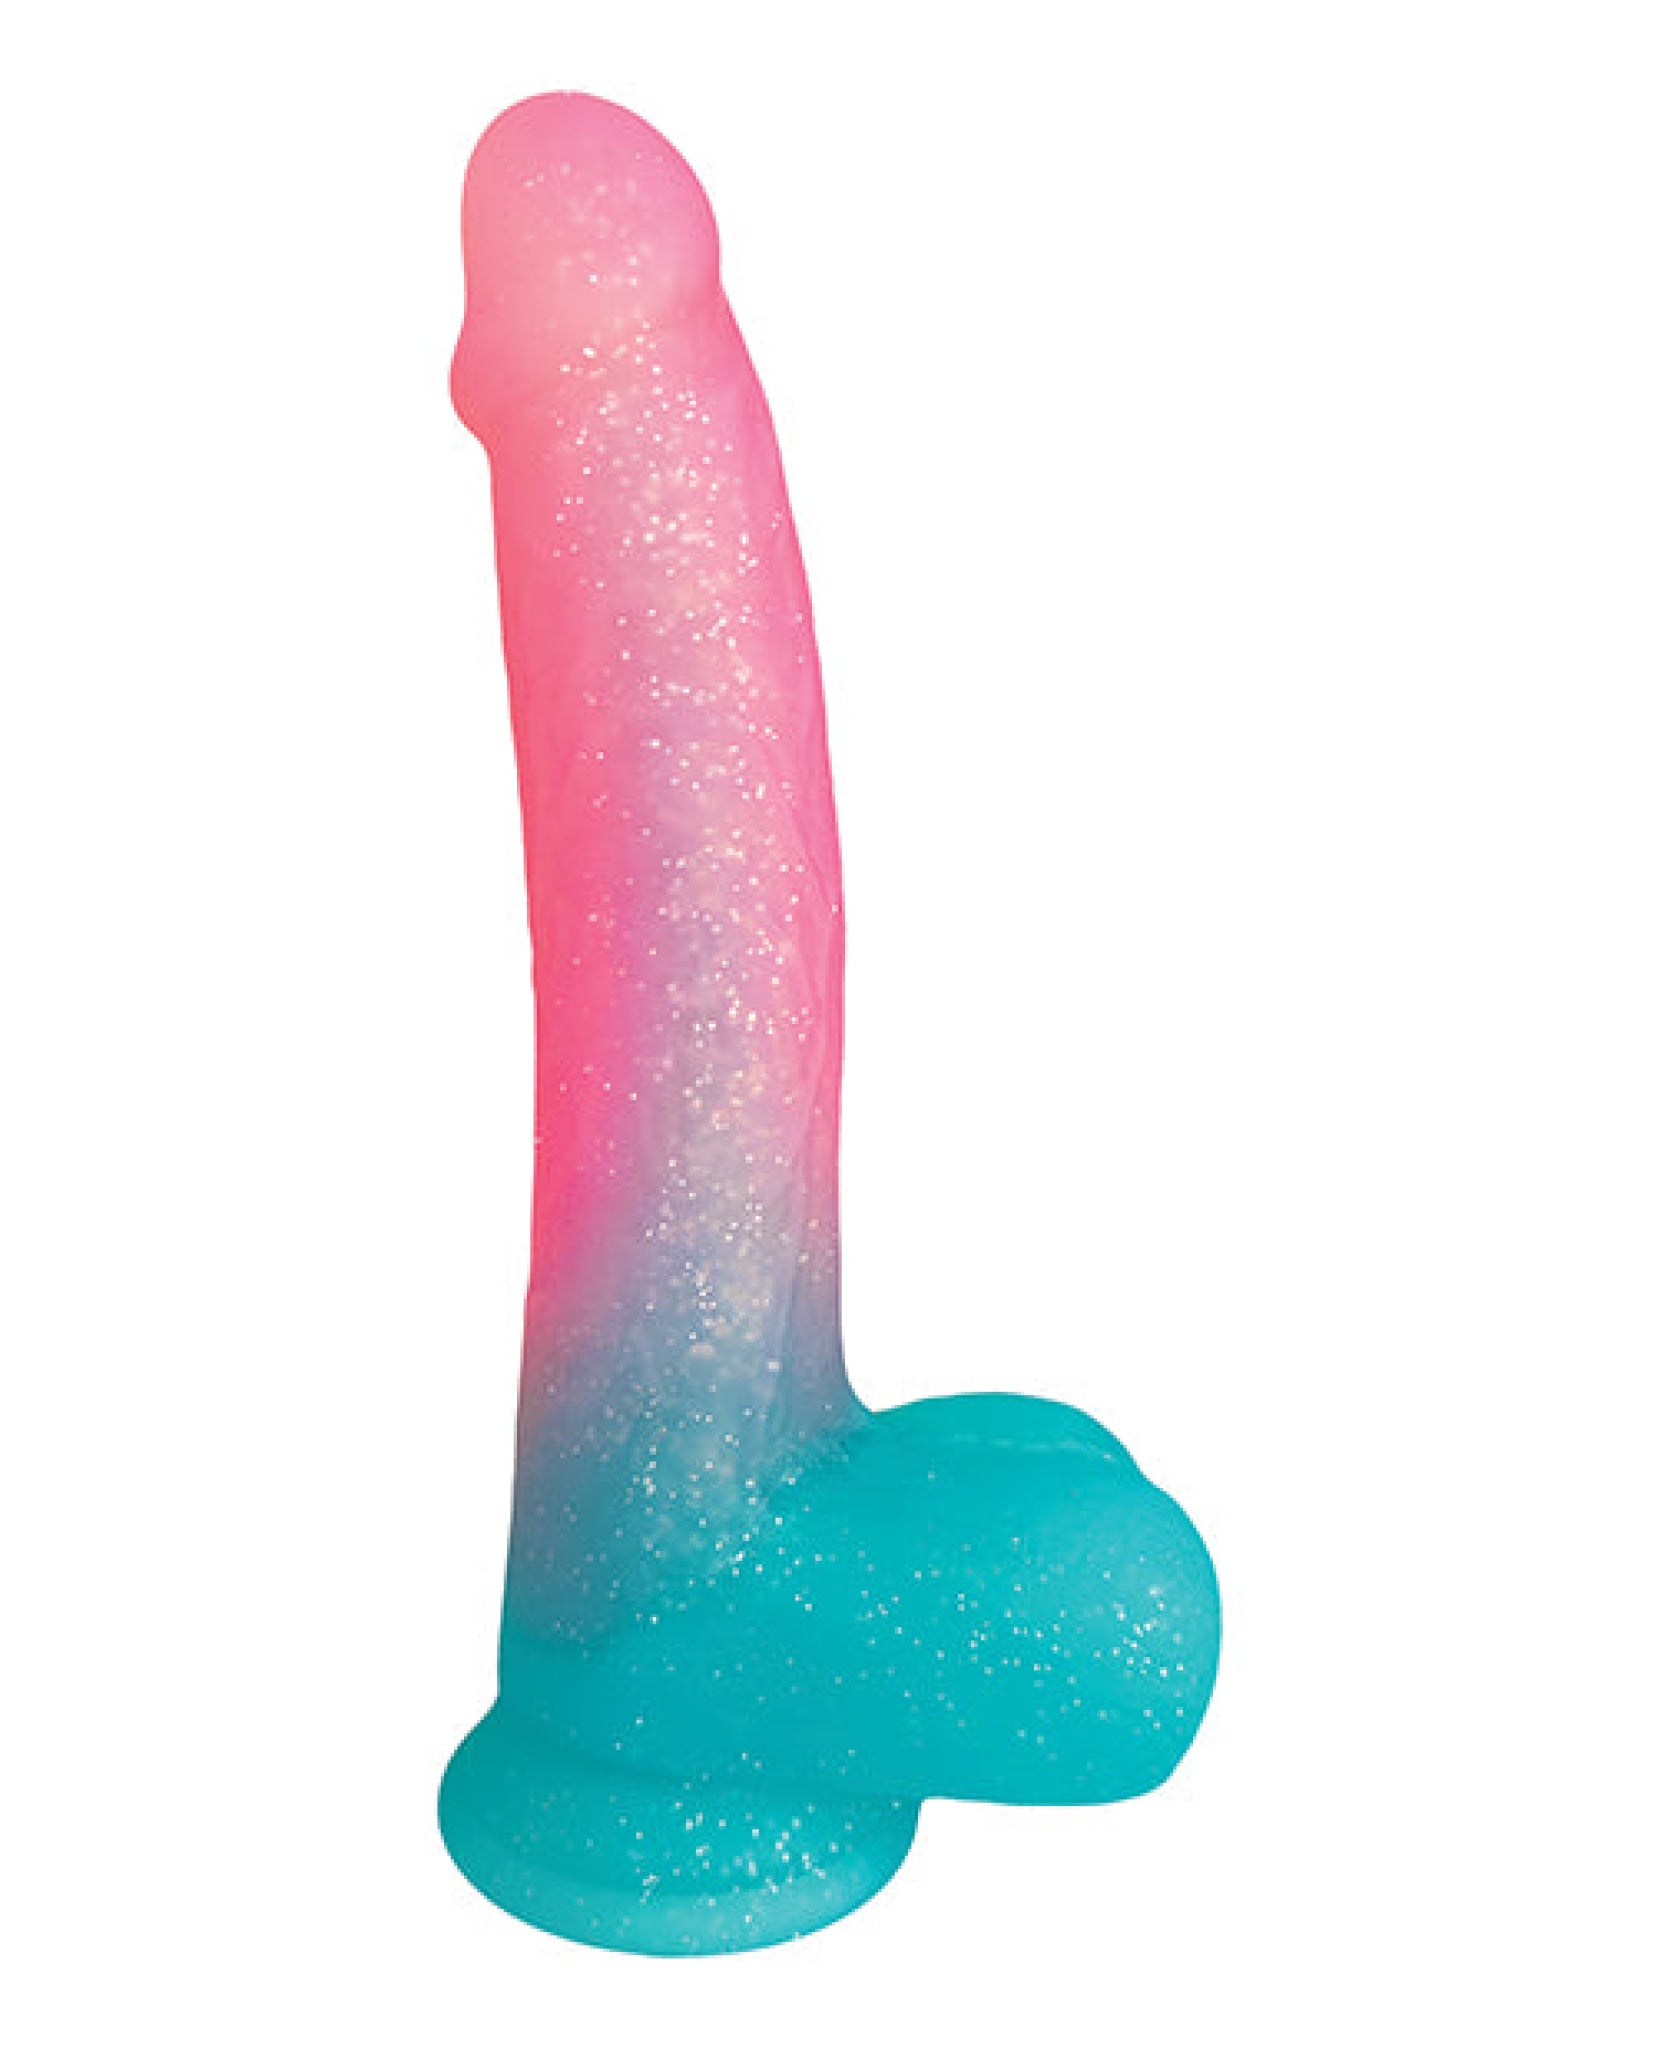 Sweet Sex 8.5" Lollicock Cotton Candy Dildo - Multi Color Hott Products